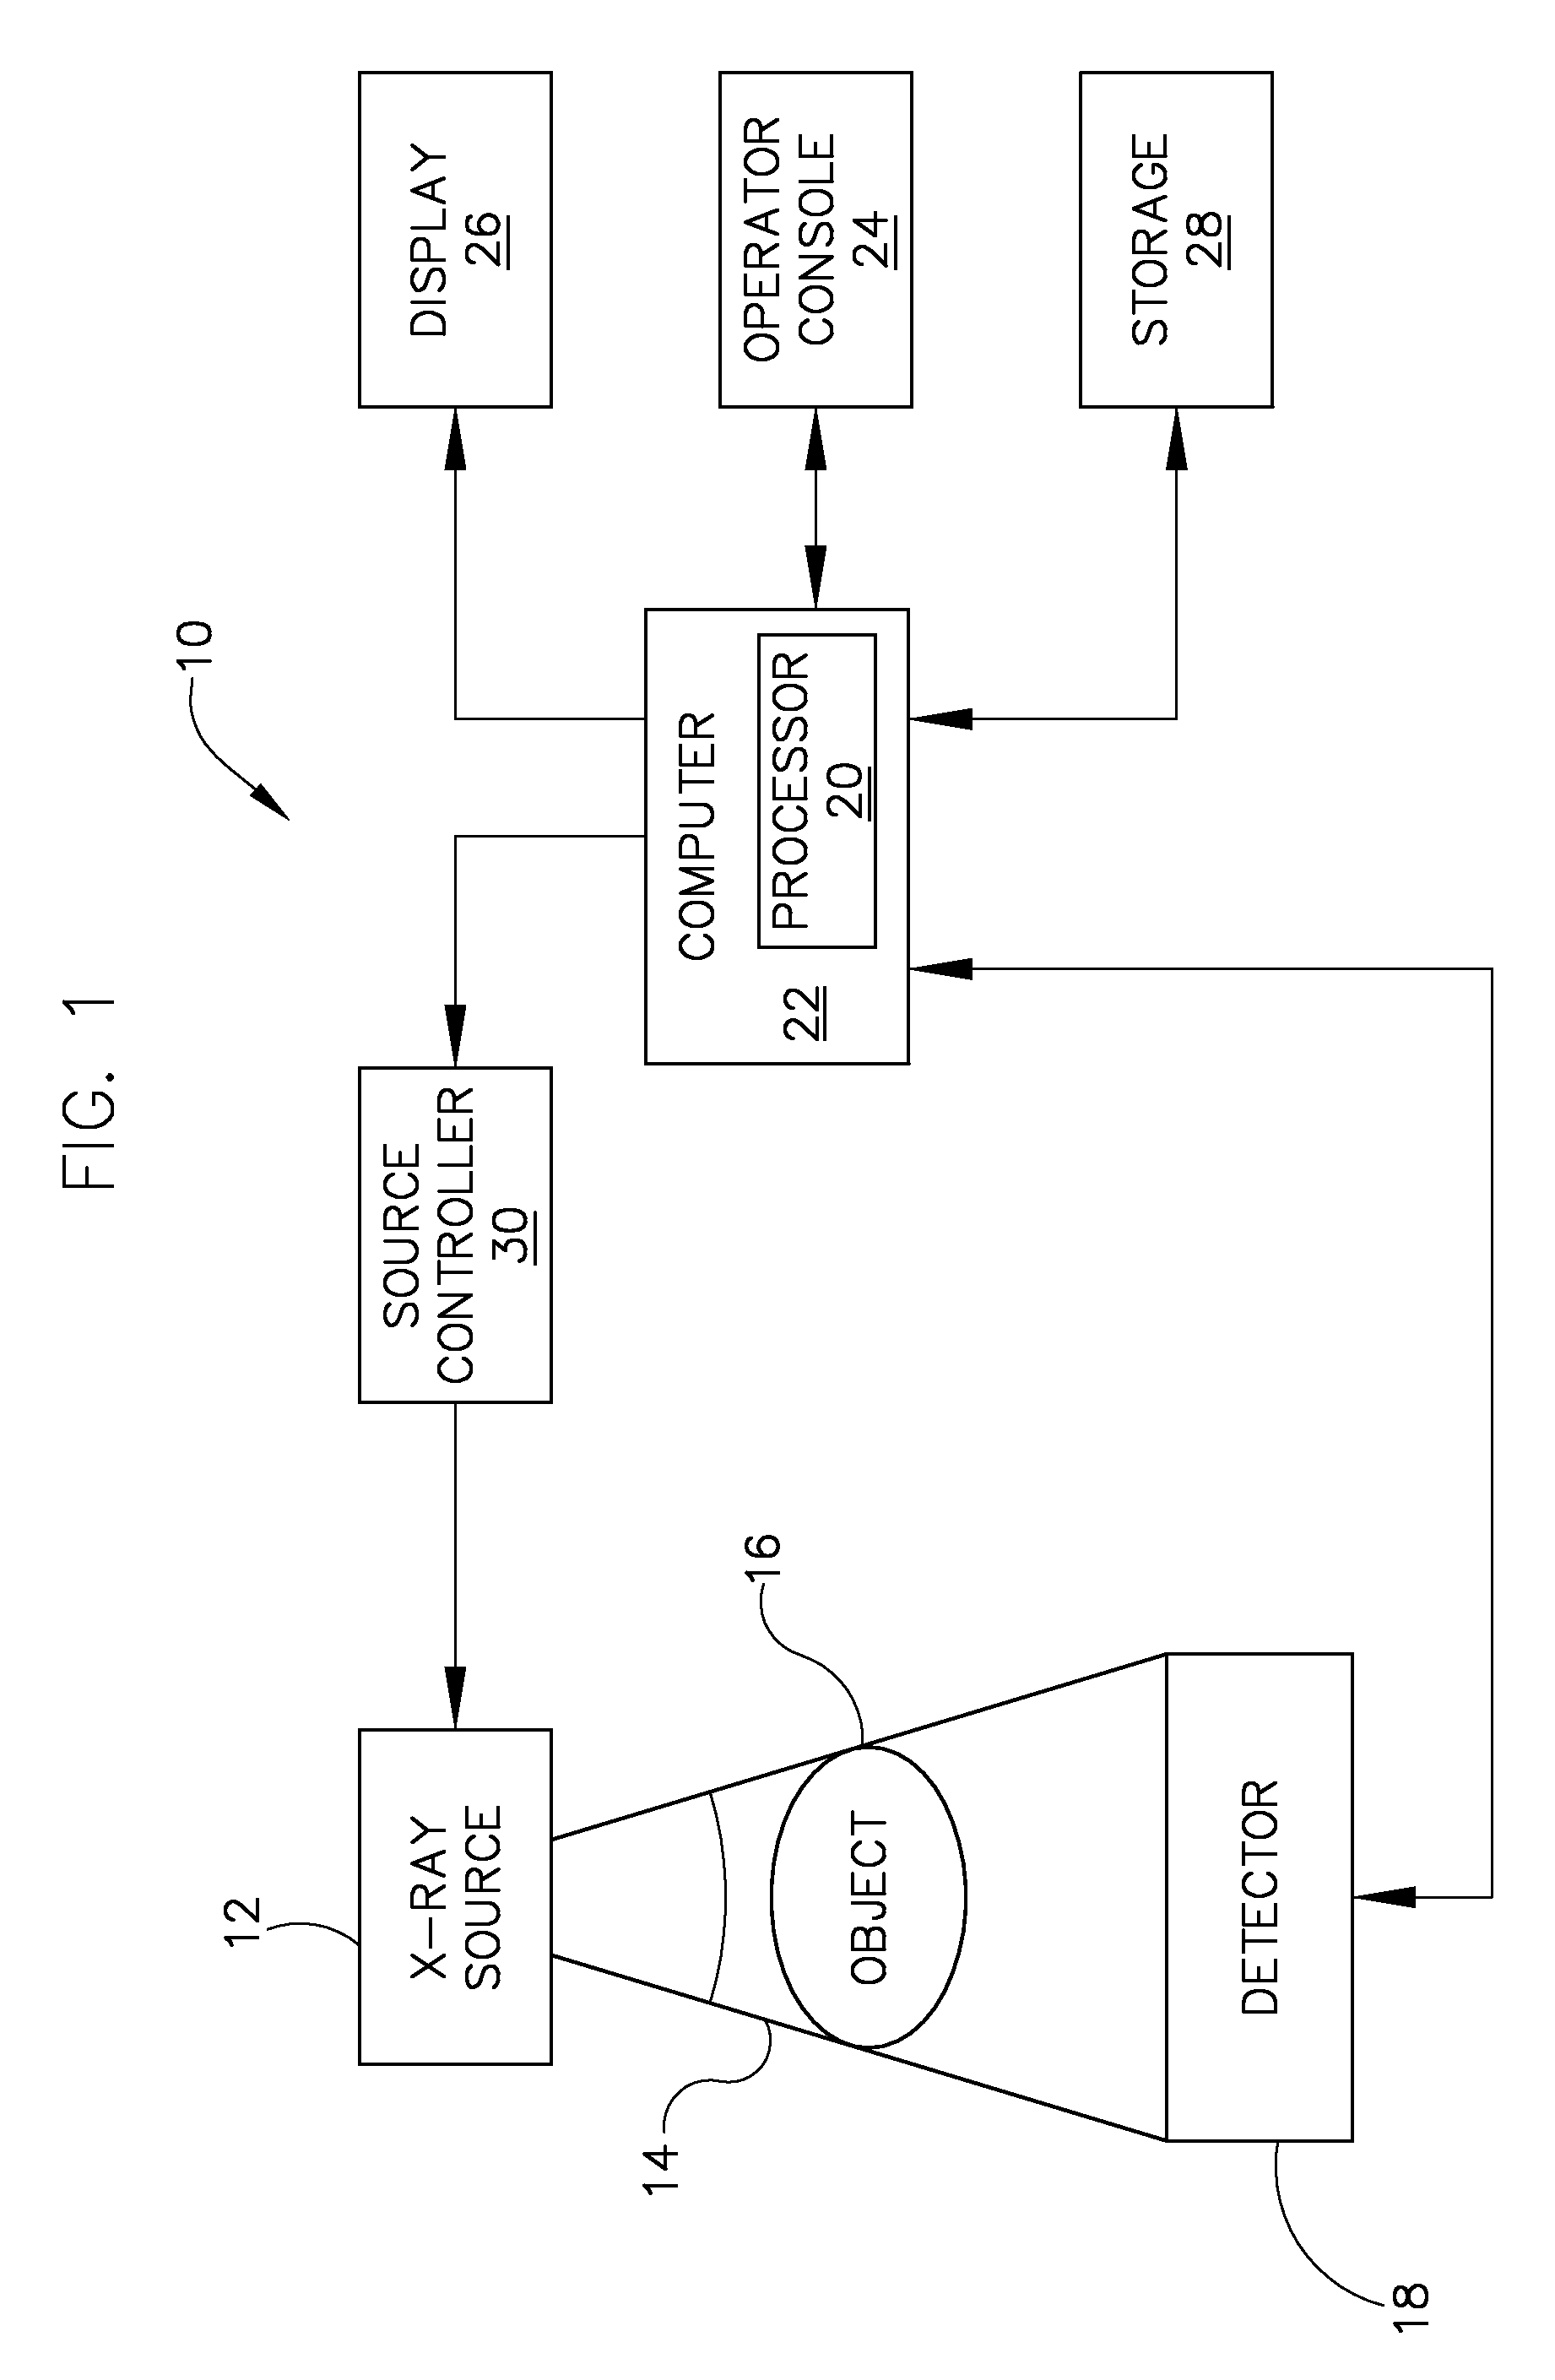 Braze assembly with beryllium diffusion barrier and method of making same